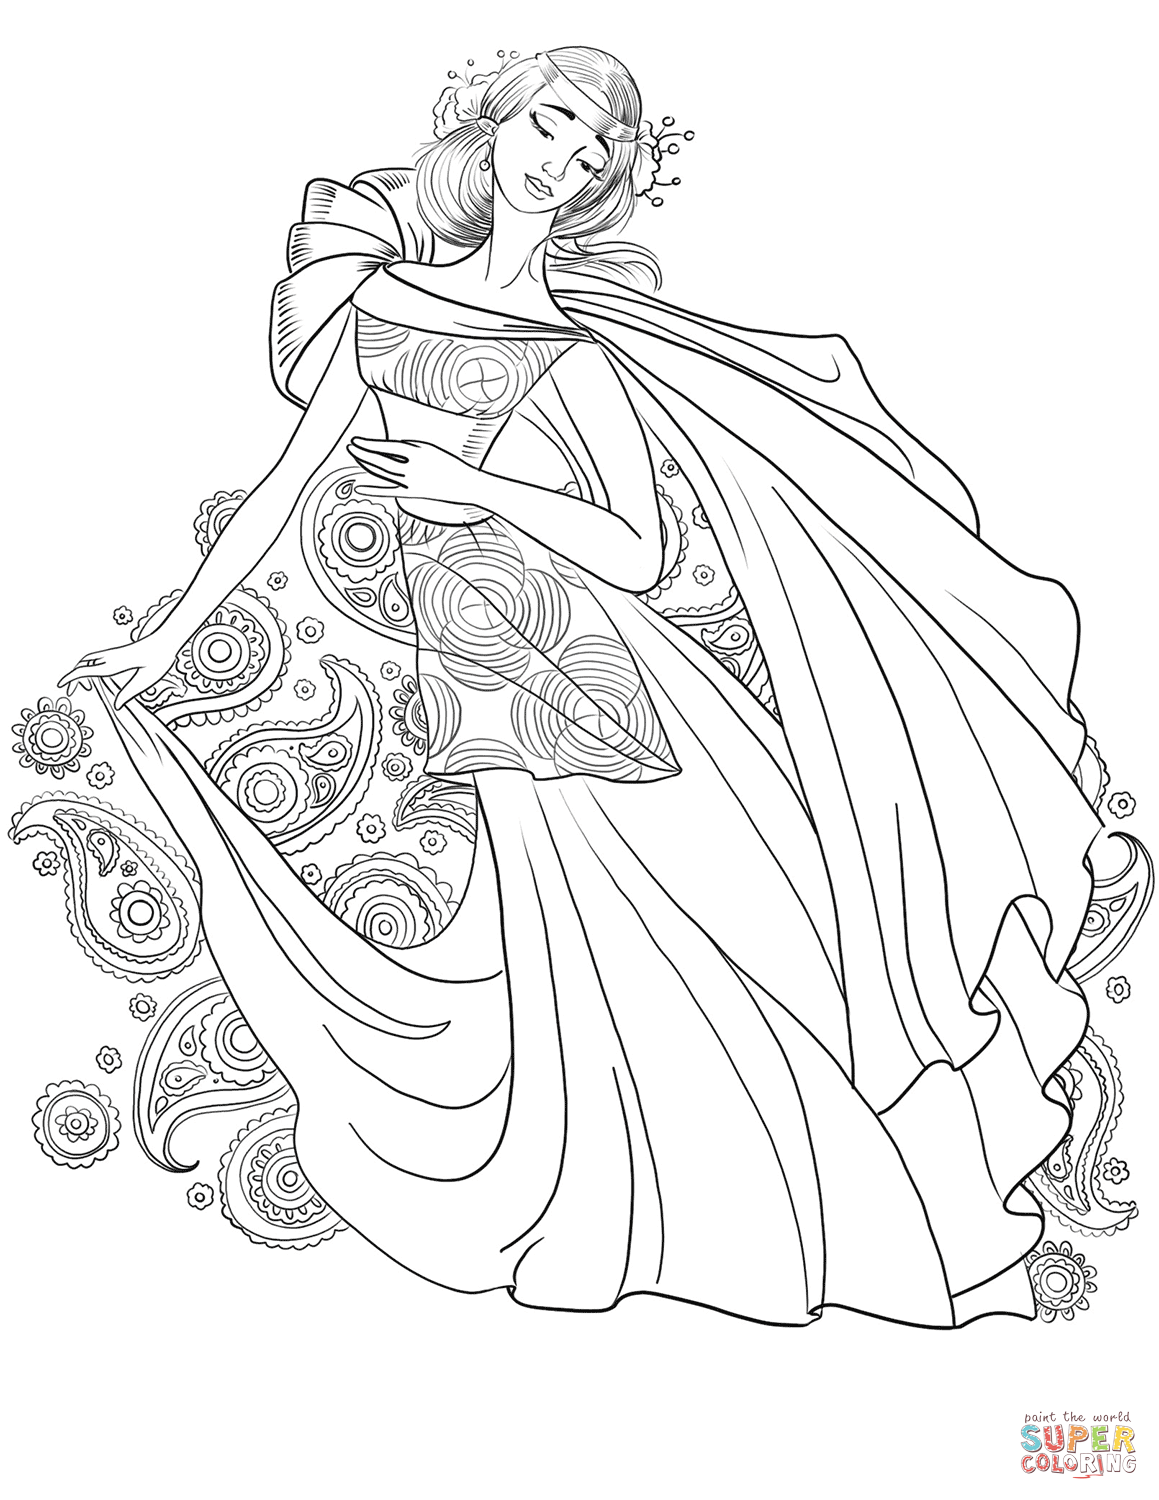 Lady from 70's with Paisley Motif coloring page | Free Printable Coloring  Pages